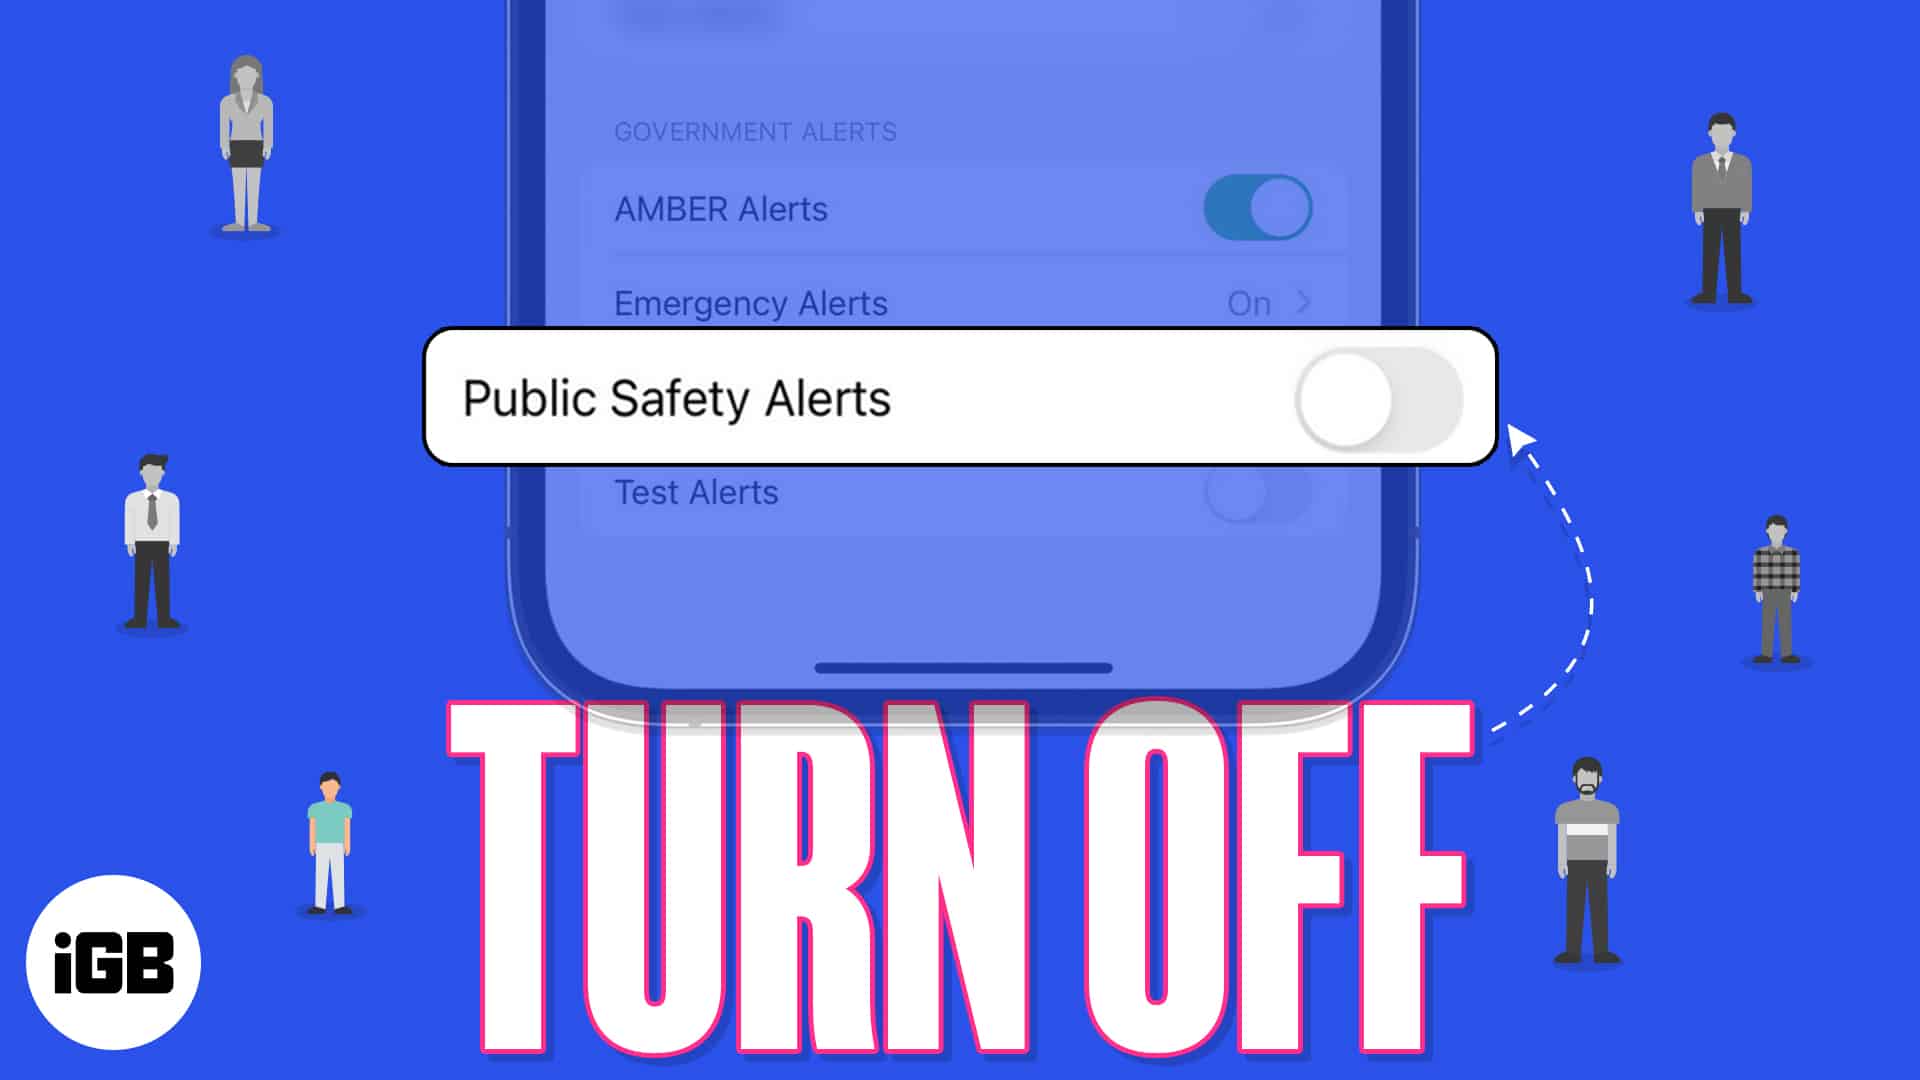 How to turn off emergency and amber alerts on iphone